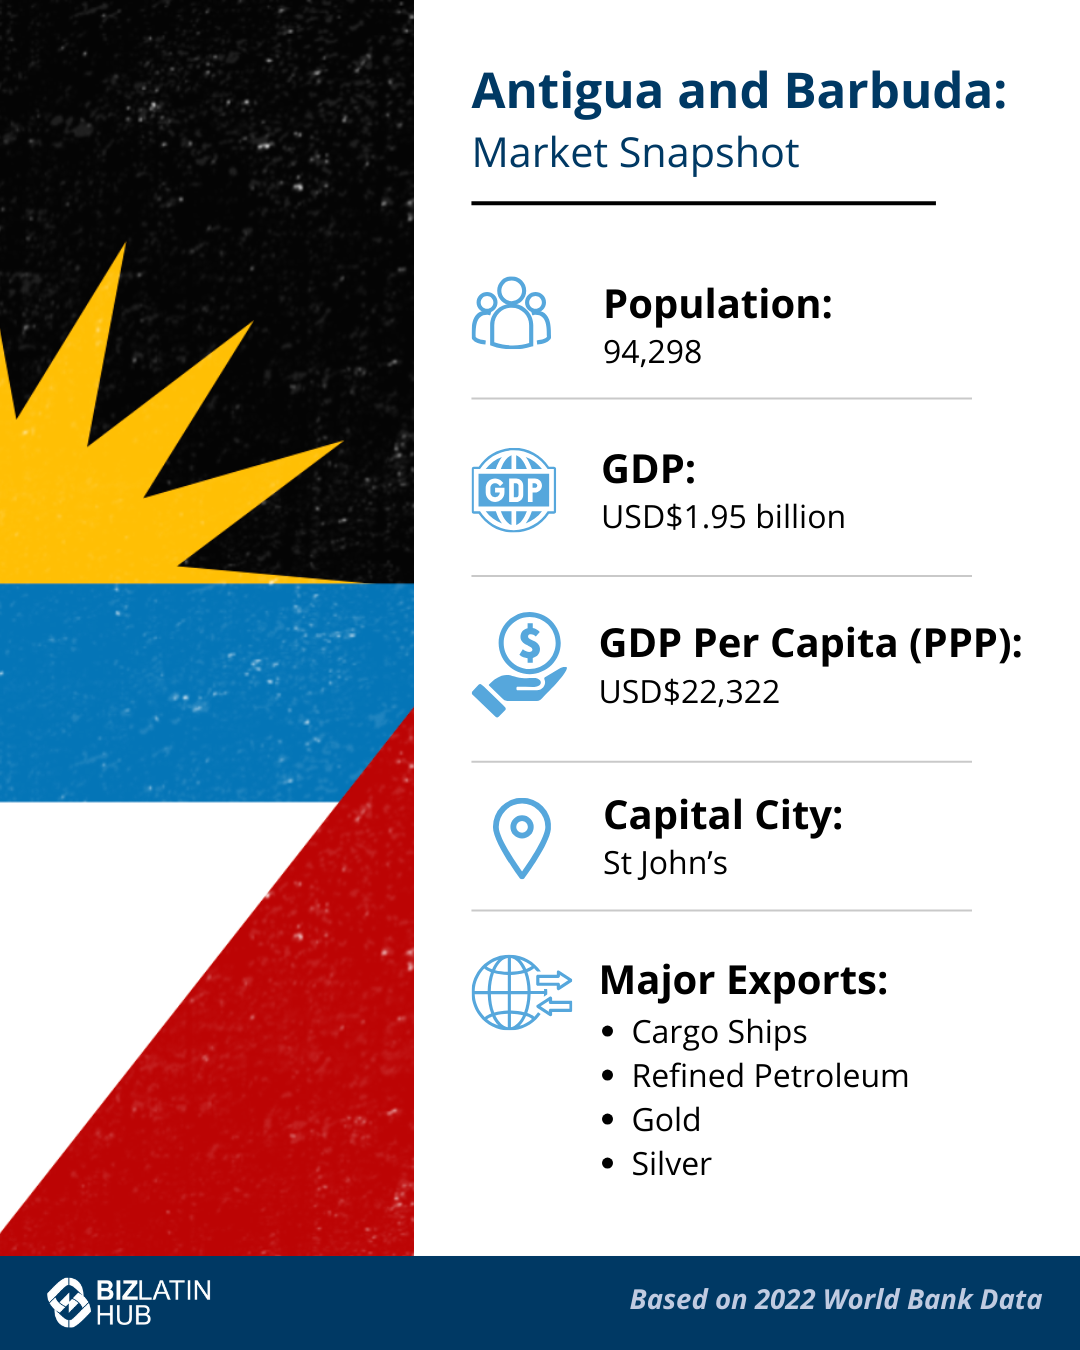 Company formation in Antigua and Barbuda: a market snapshot from 2022 to 2023